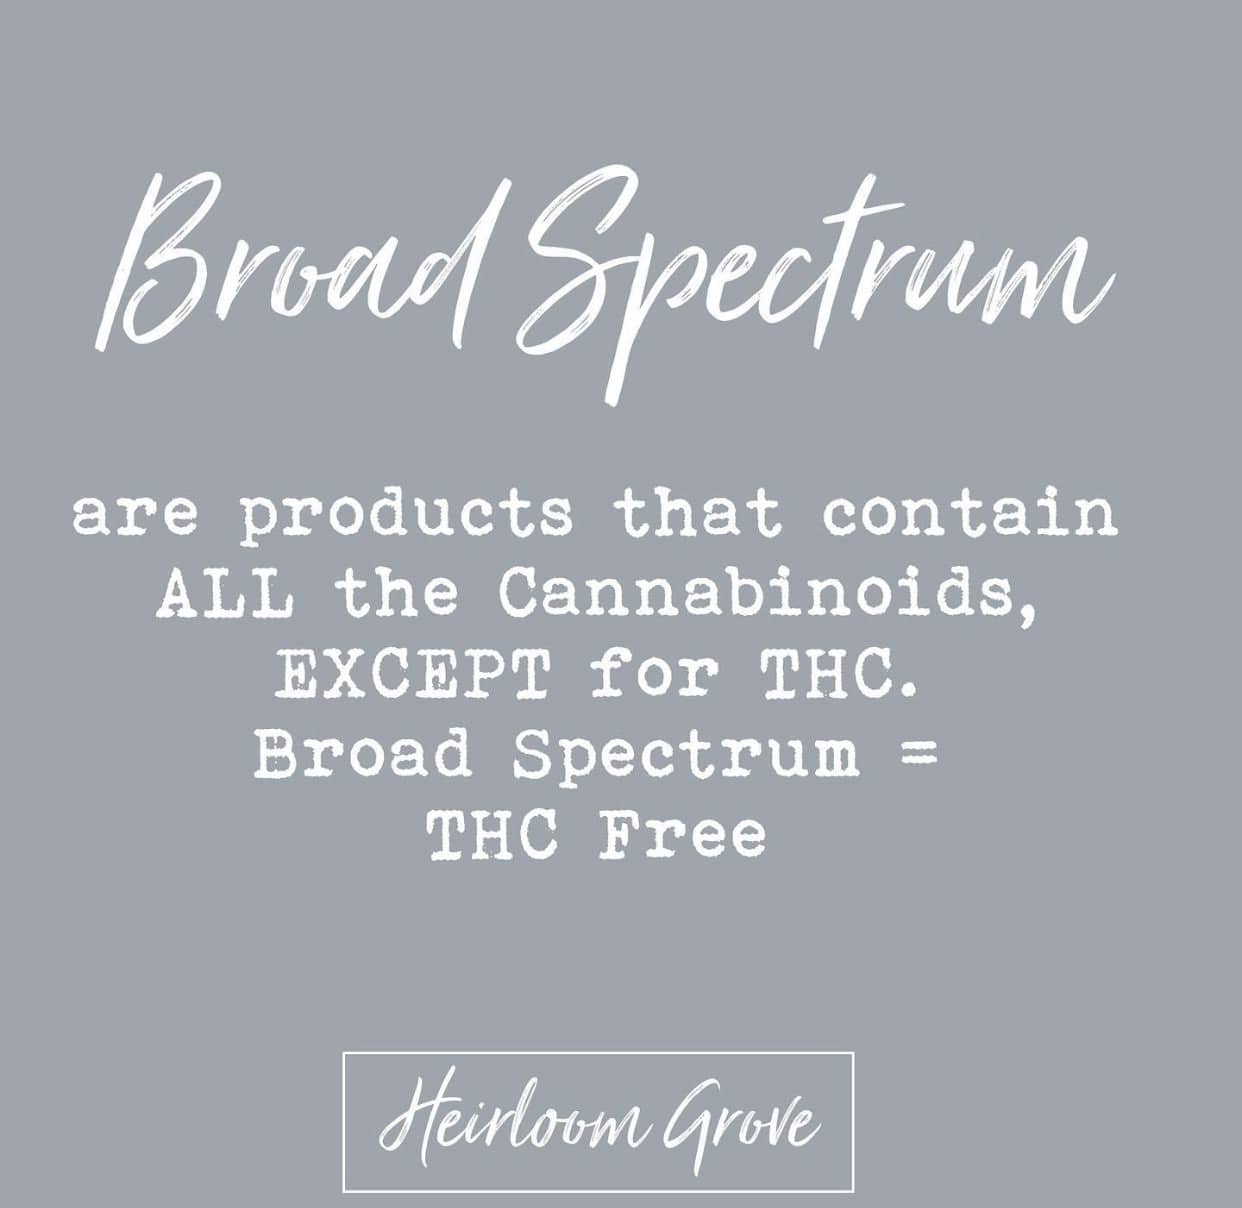 Featured image for “Broad Spectrum Products”